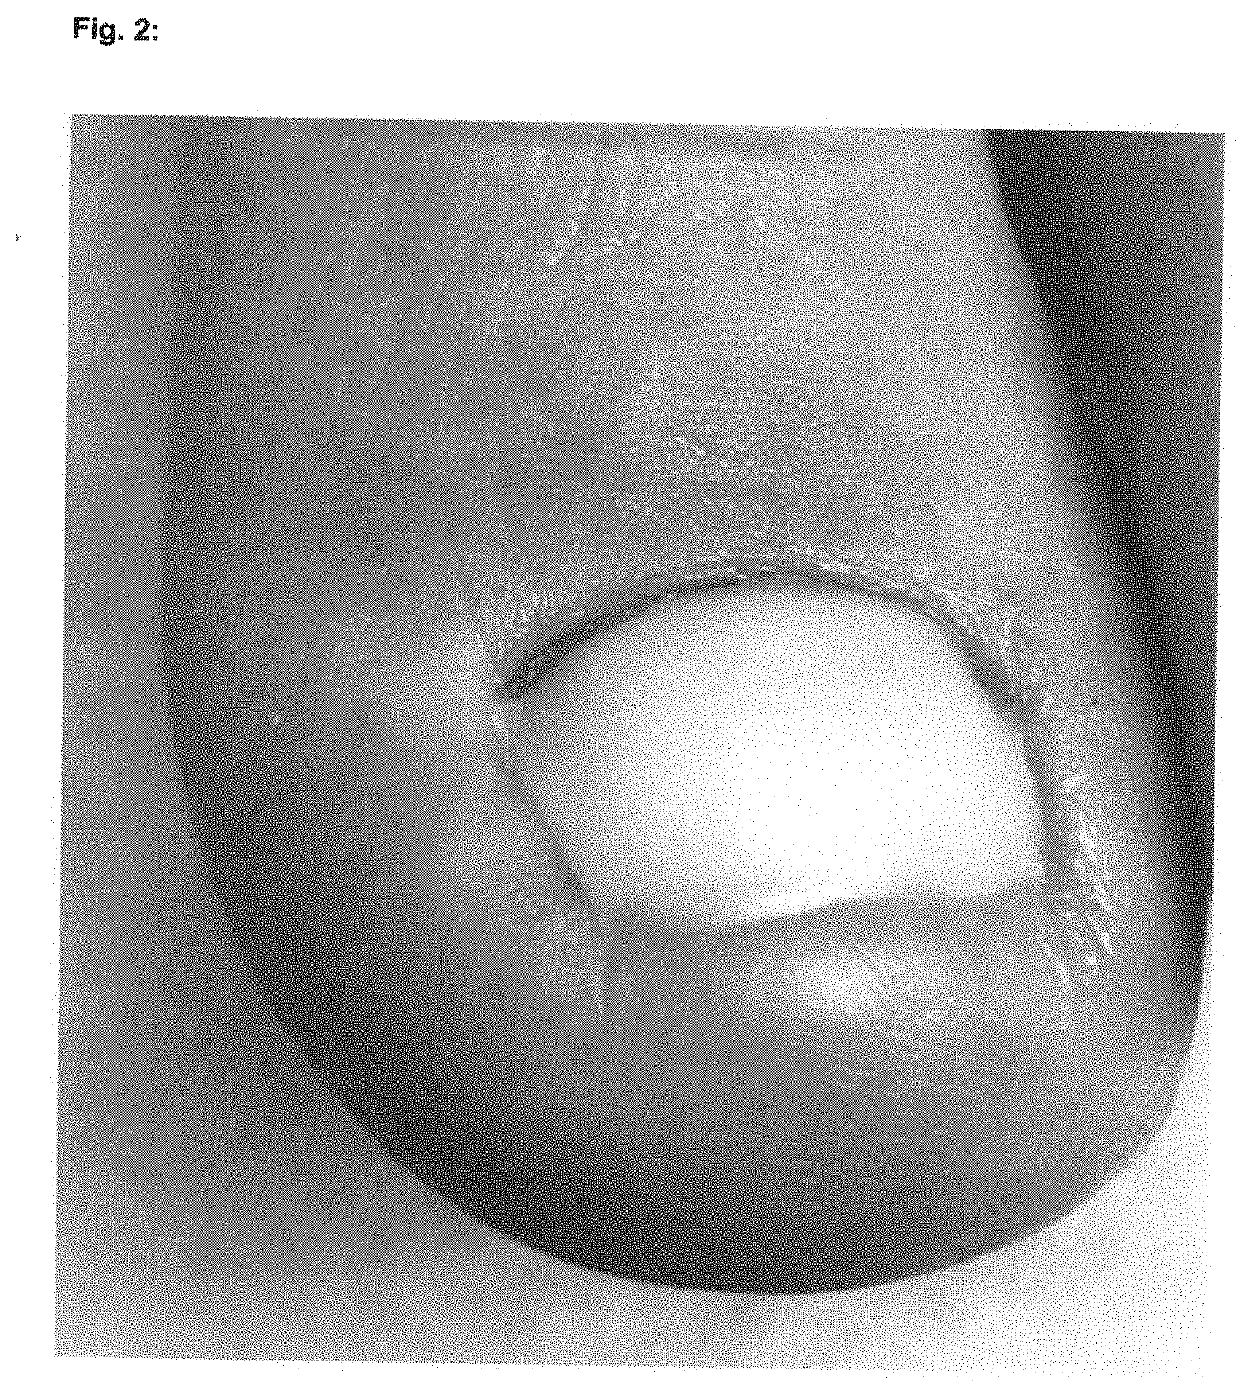 Light-curing compositions for treating onychomycosis (fungal nail infection)